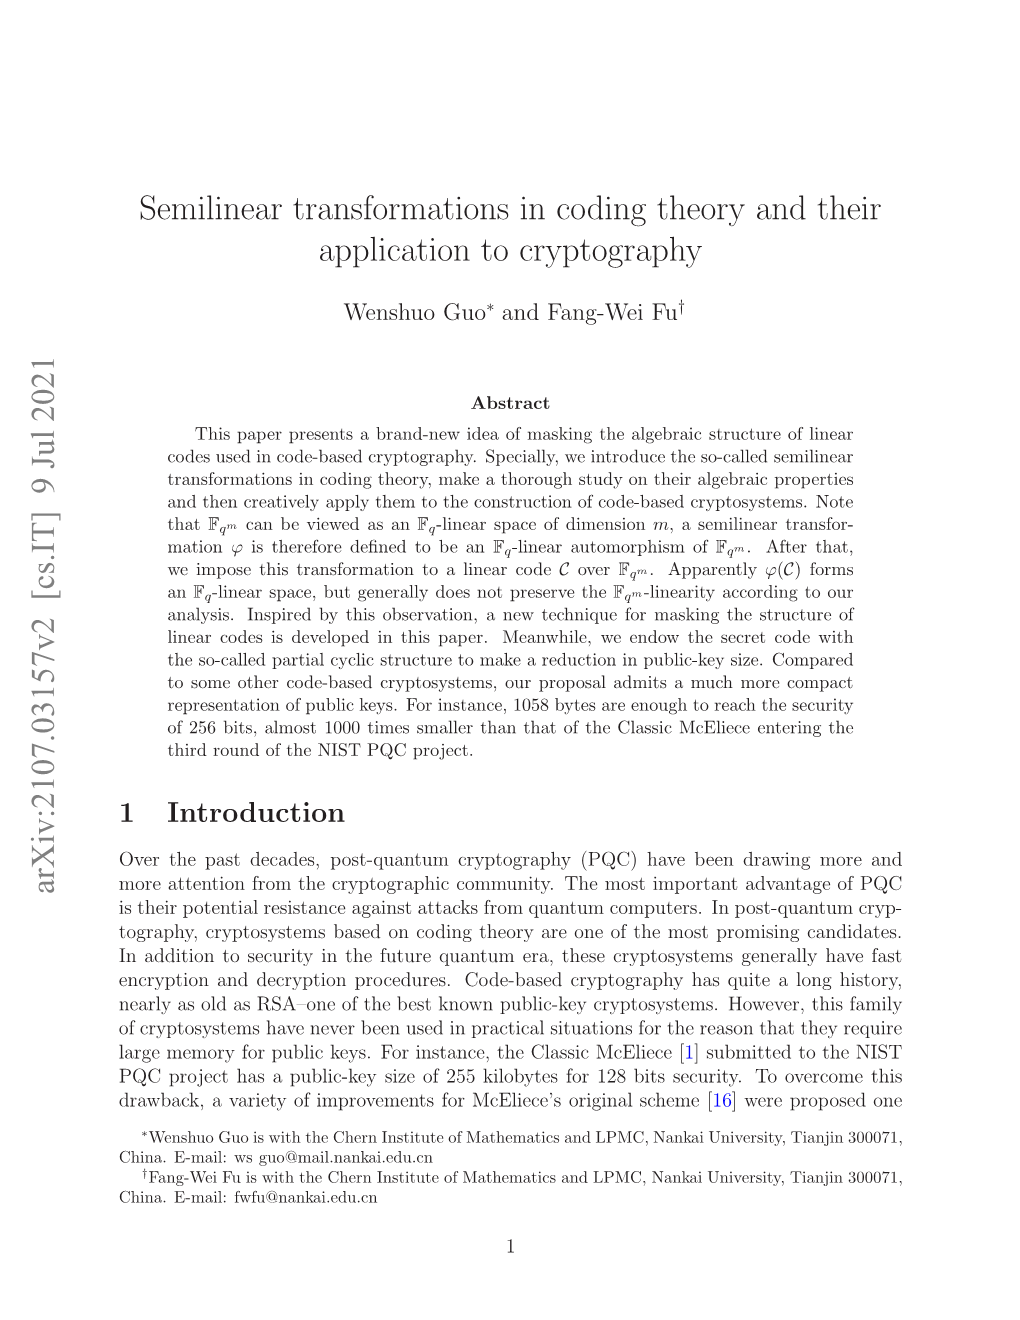 Semilinear Transformations in Coding Theory and Their Application To